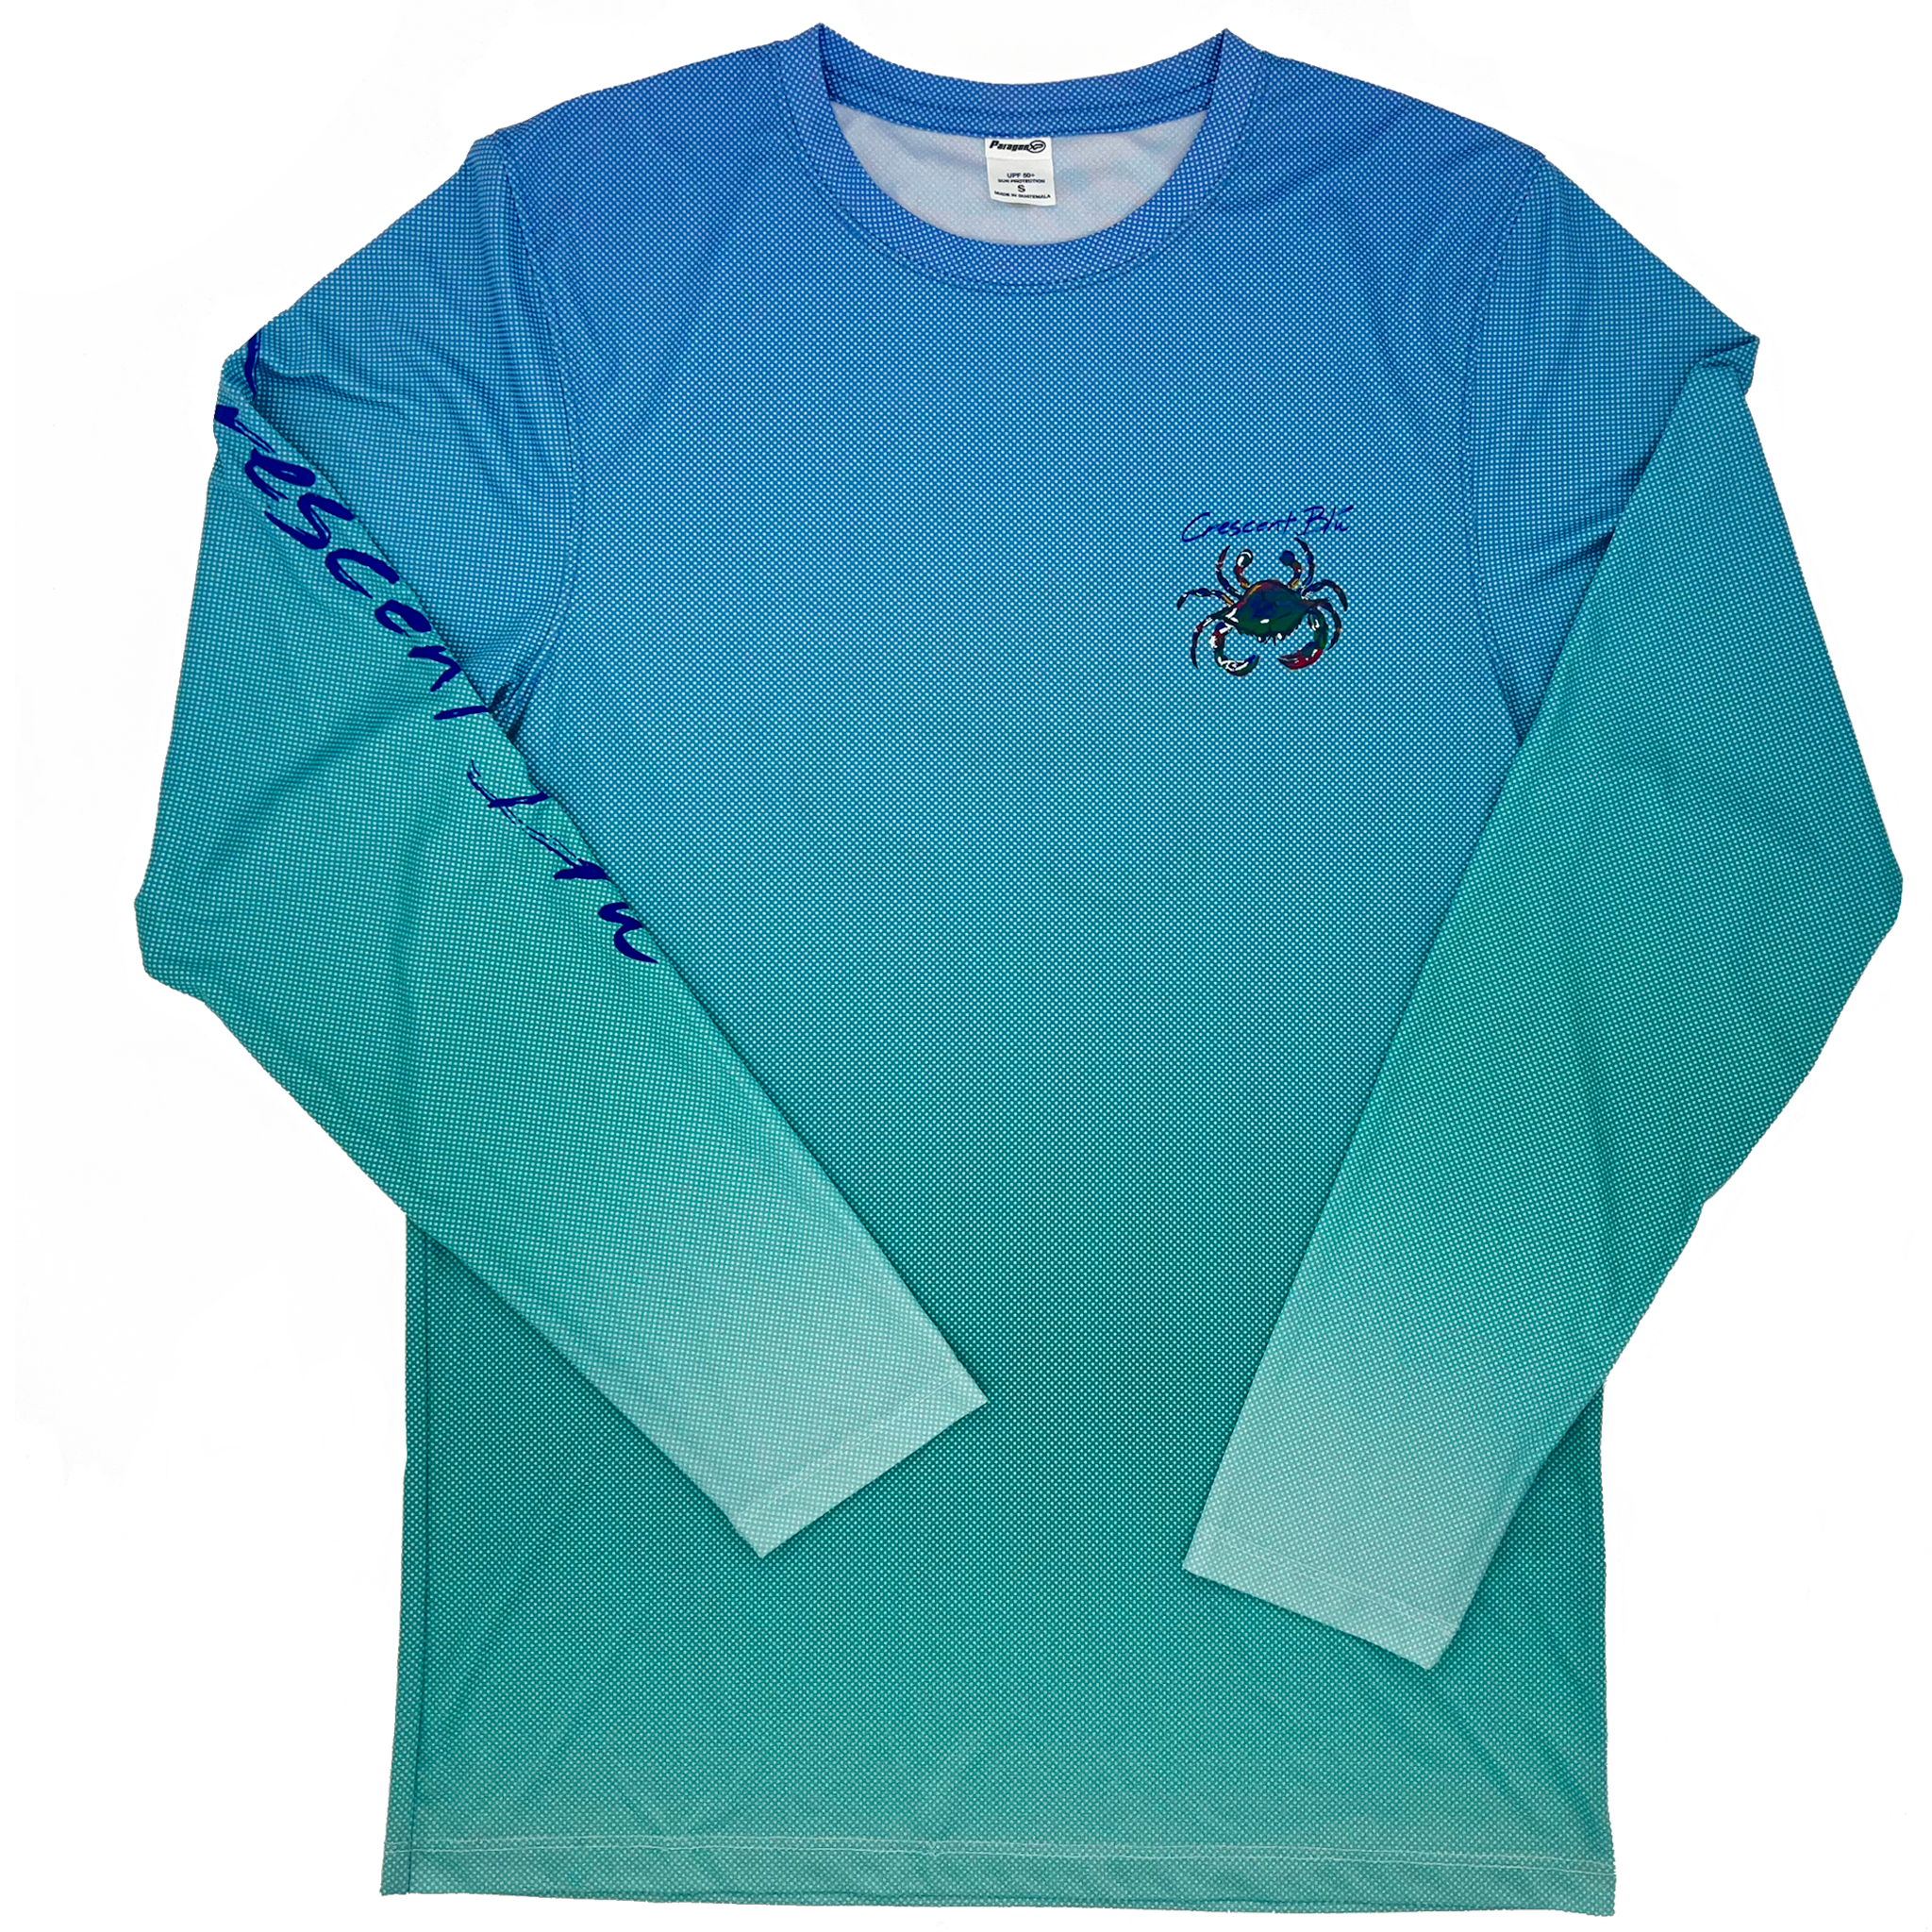 Long sleeve with a gradient color background from blue at the top to teal at the bottom. A blue crab is on the left chest and you can see the partial writing of Crescent Blú on the right sleeve.